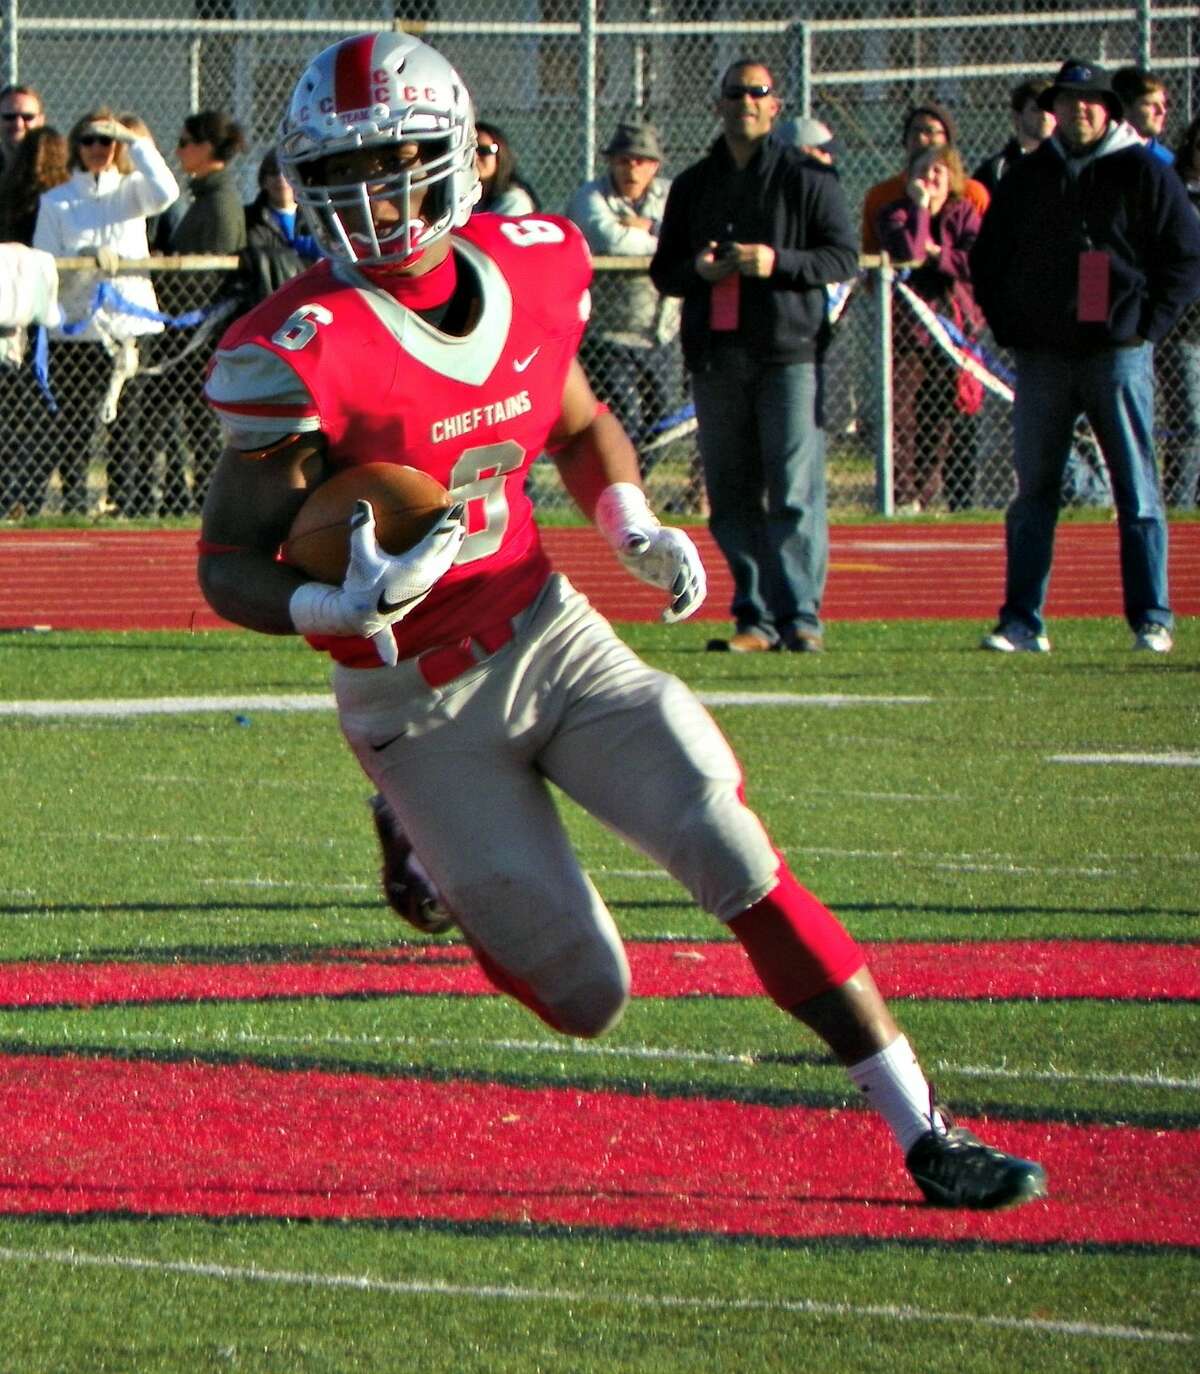 Nate Richam of Conard made his first All-CCC team in 2015 by being one of the top running backs in the state. Photo by Derek Turner.